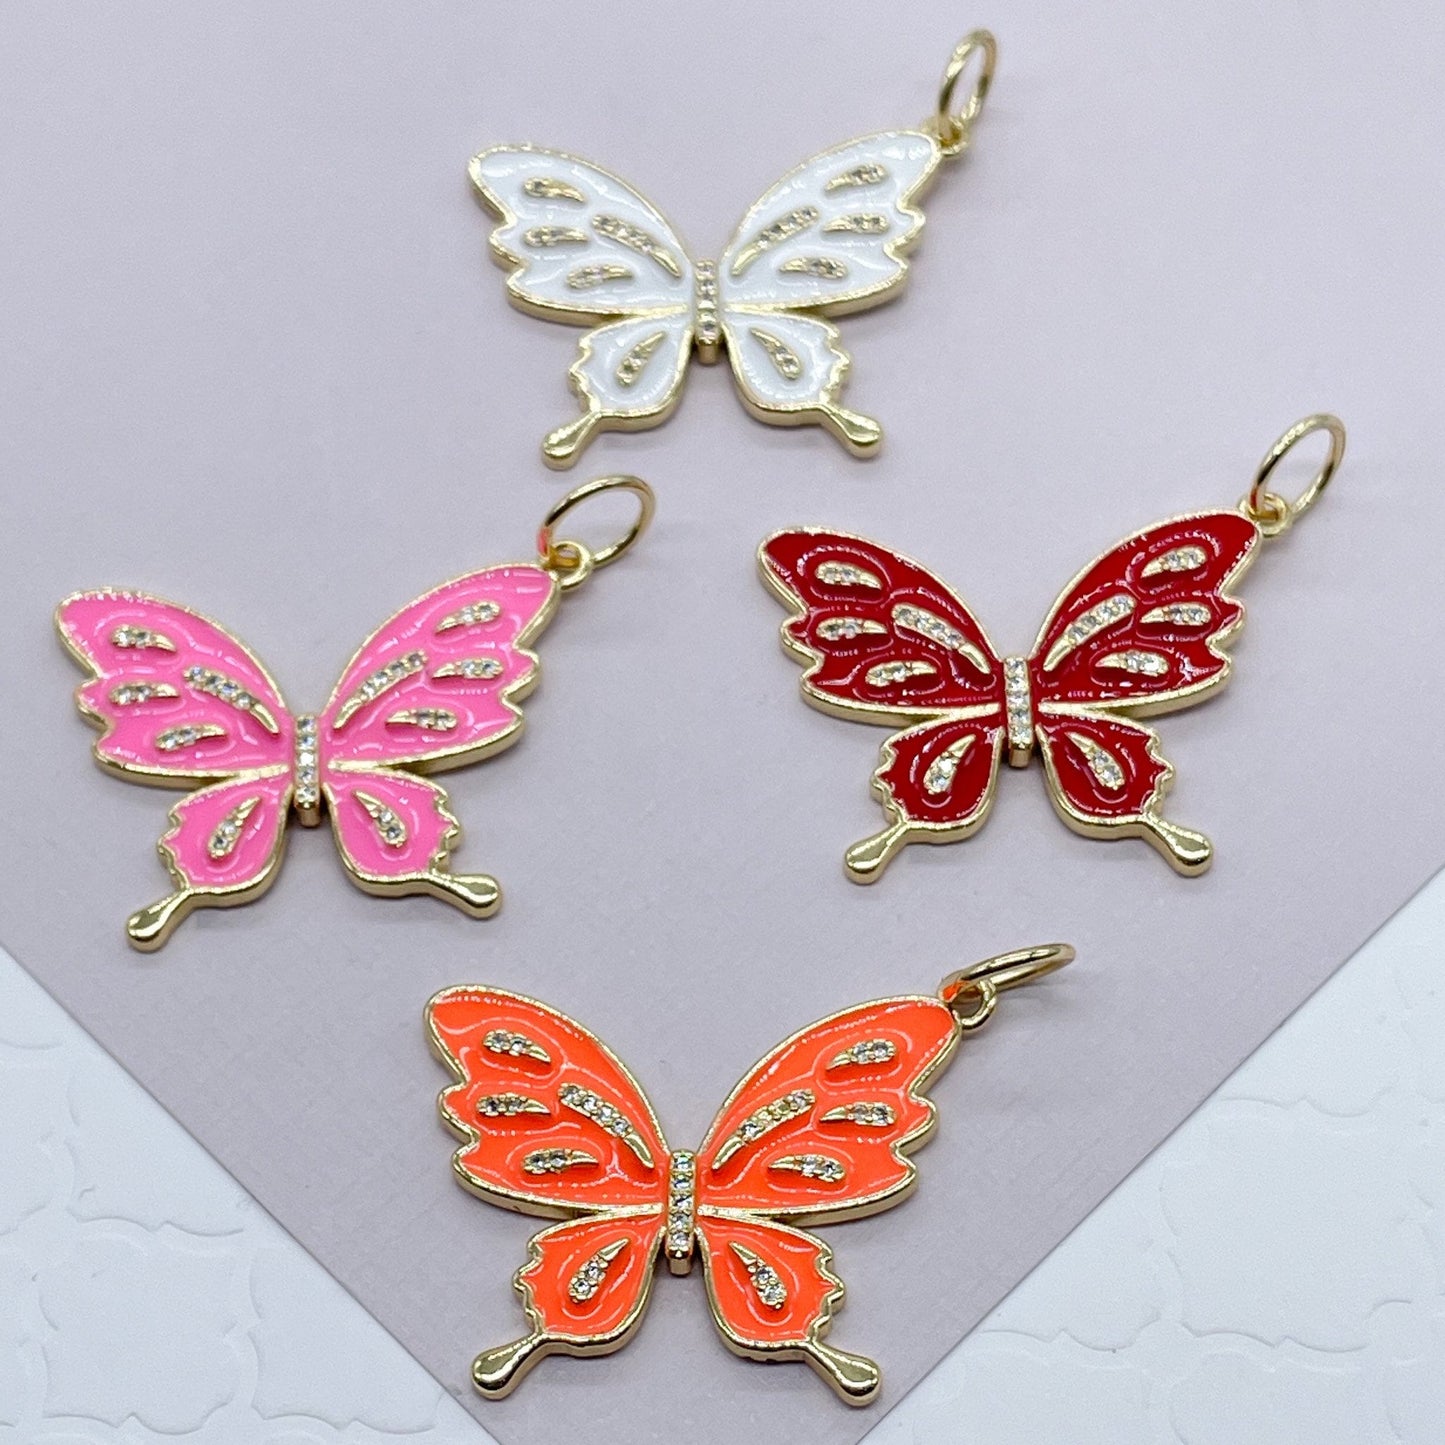 18k Gold Layered Colorful Butterfly Enamel Pendant Wholesale Charm Jewelry Making